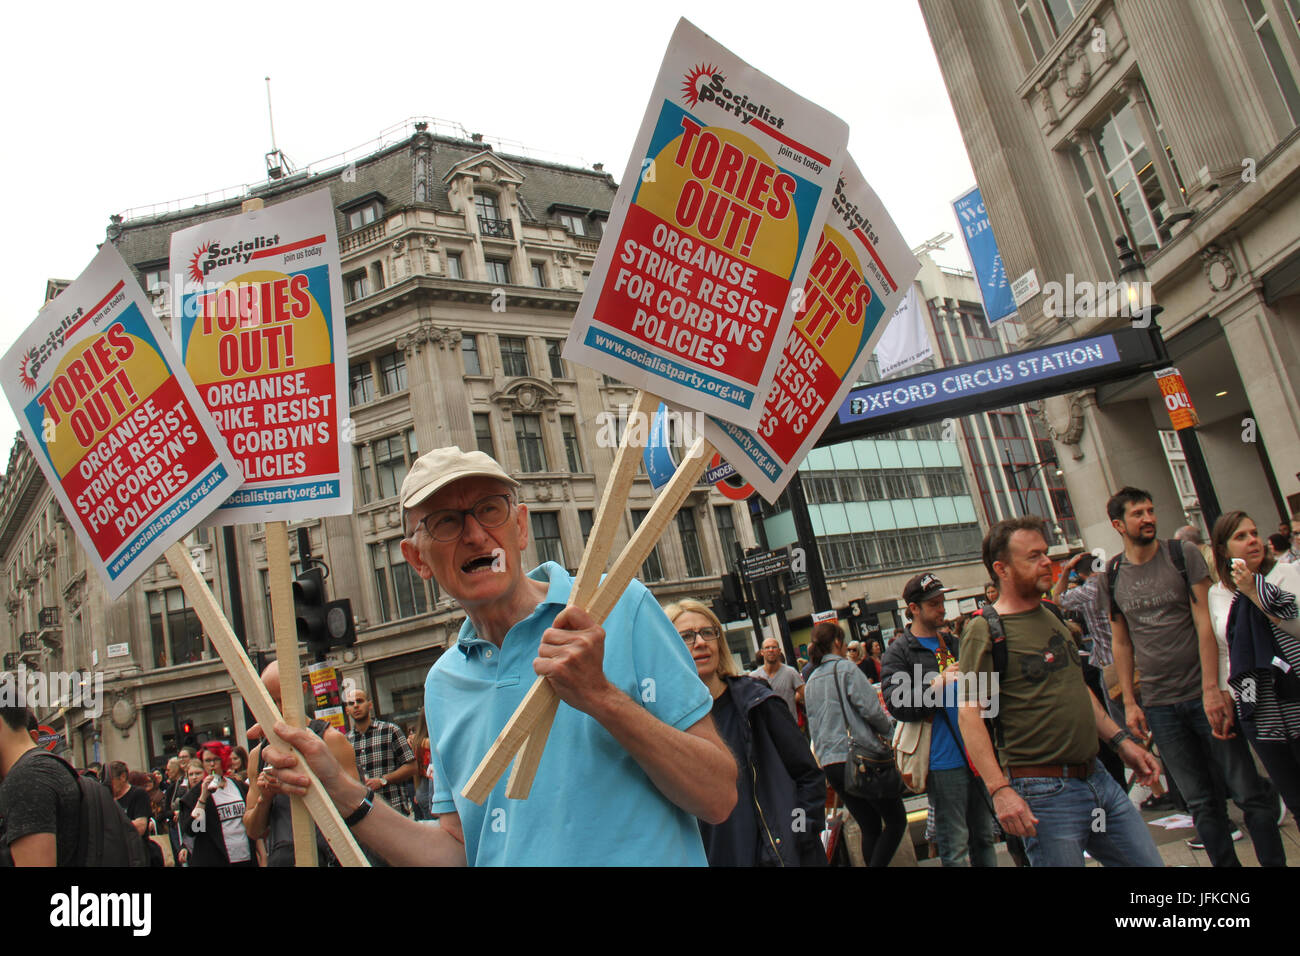 London, UK - 1 July 2017 - A demonstrator holds up placards by Oxford Street station ahead of the Tories Out march to Parliament Square on 1 July. Demonstrators took to the streets in a national demonstration demanding for an end of the Tory government. The demo began at Portland Place with demonstrators marching to Parliament Square for a rally. Credit: David Mbiyu/Alamy Live News Stock Photo